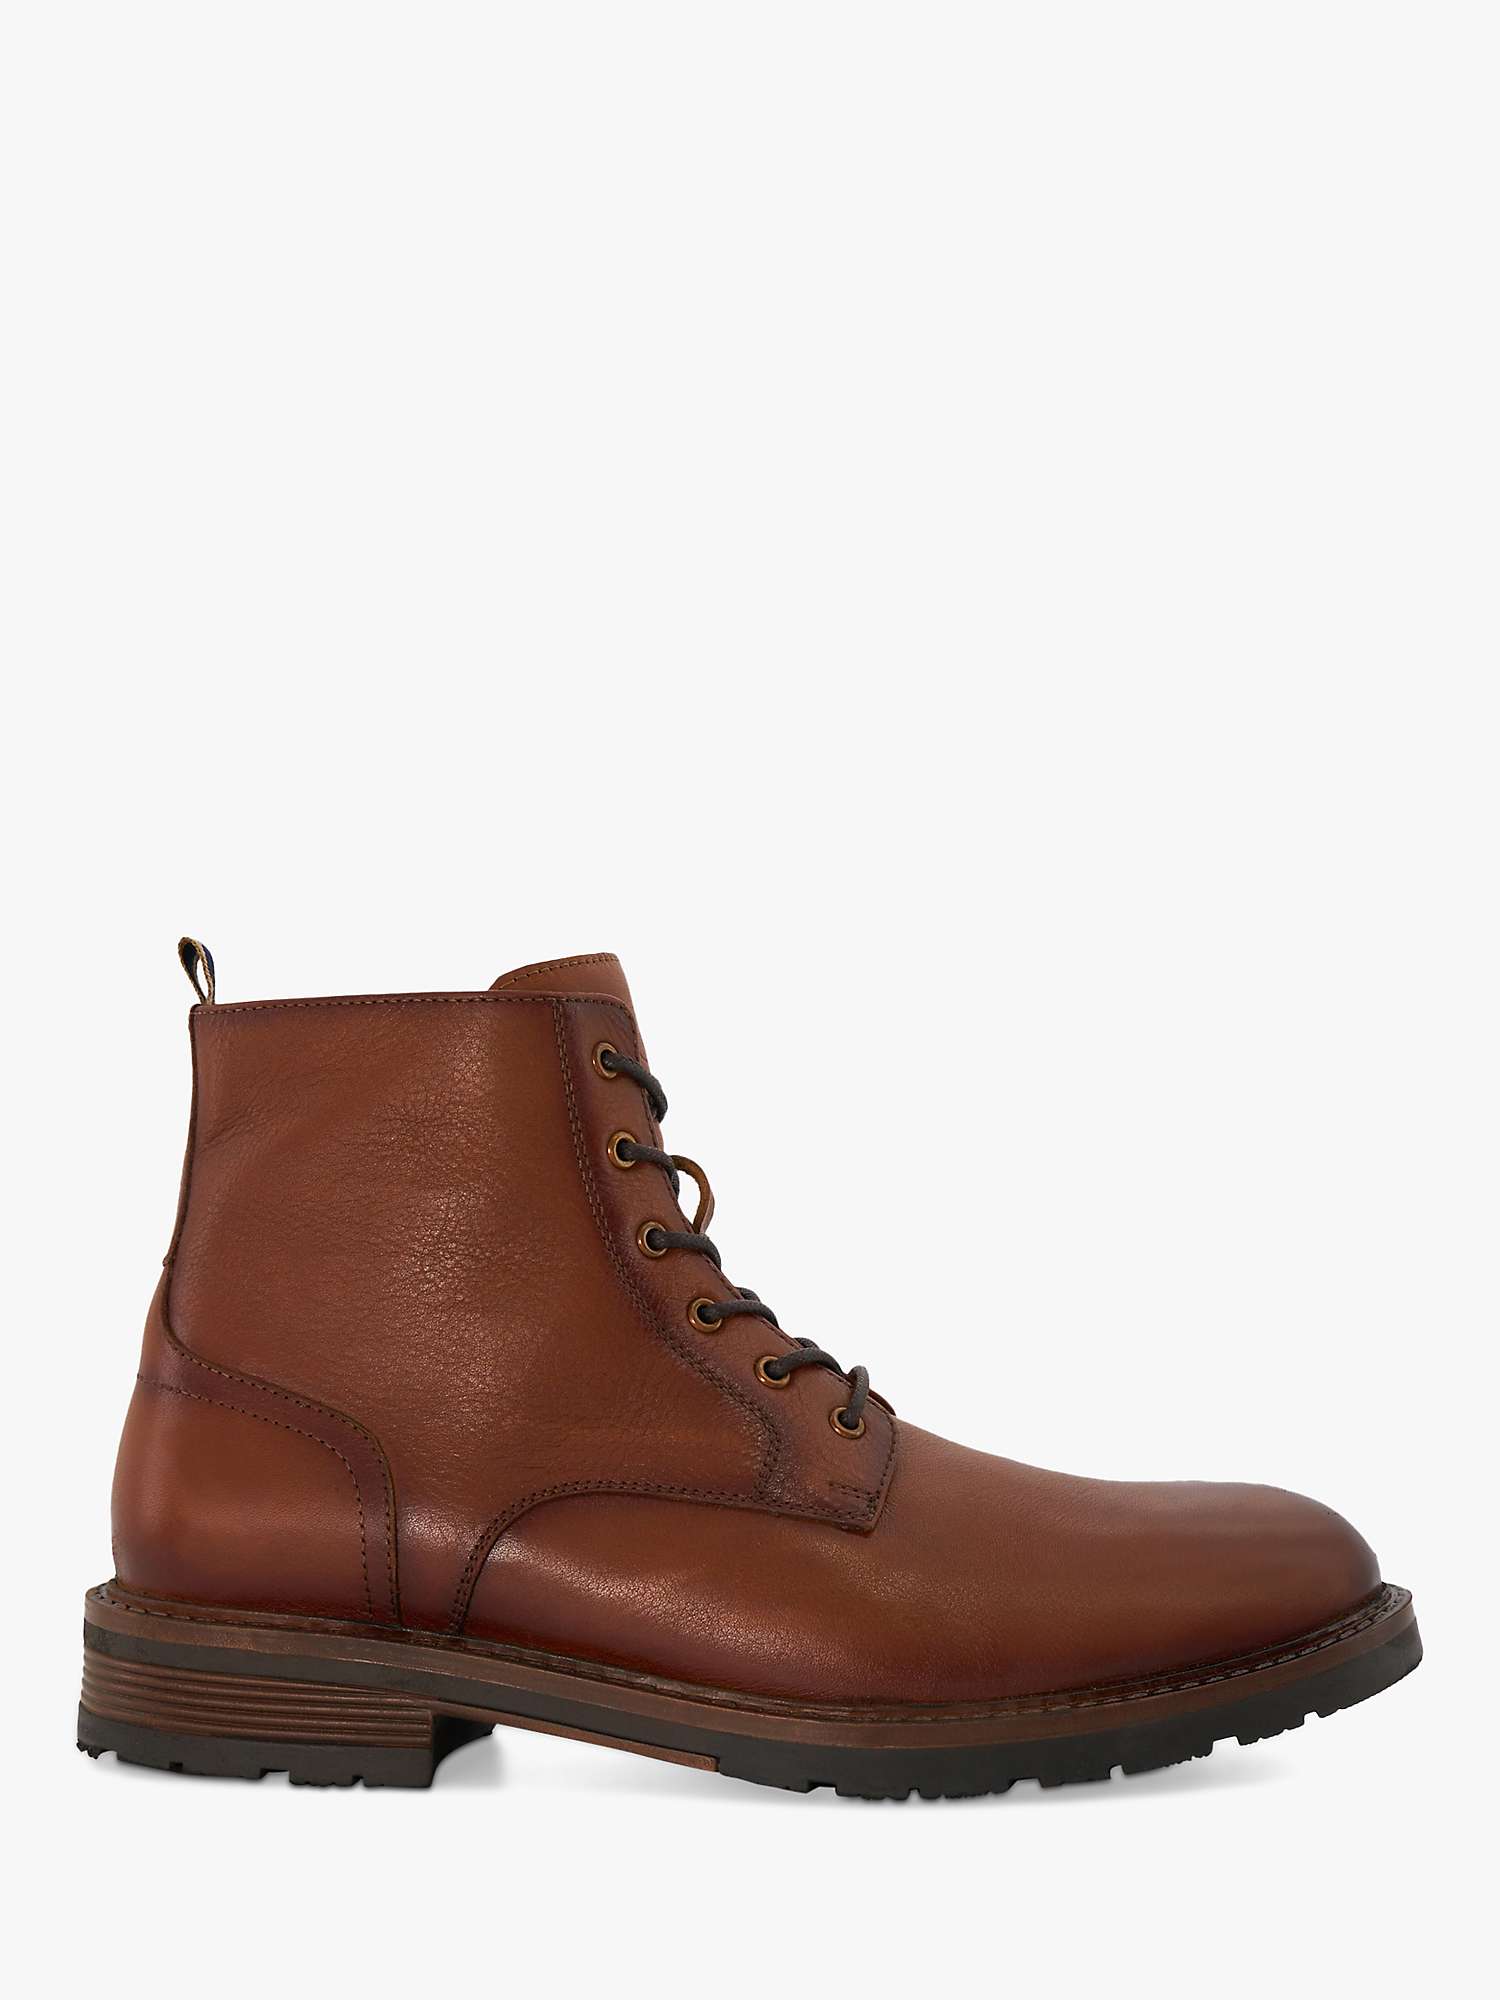 Buy Dune Cheshires Leather Boots, Tan Online at johnlewis.com